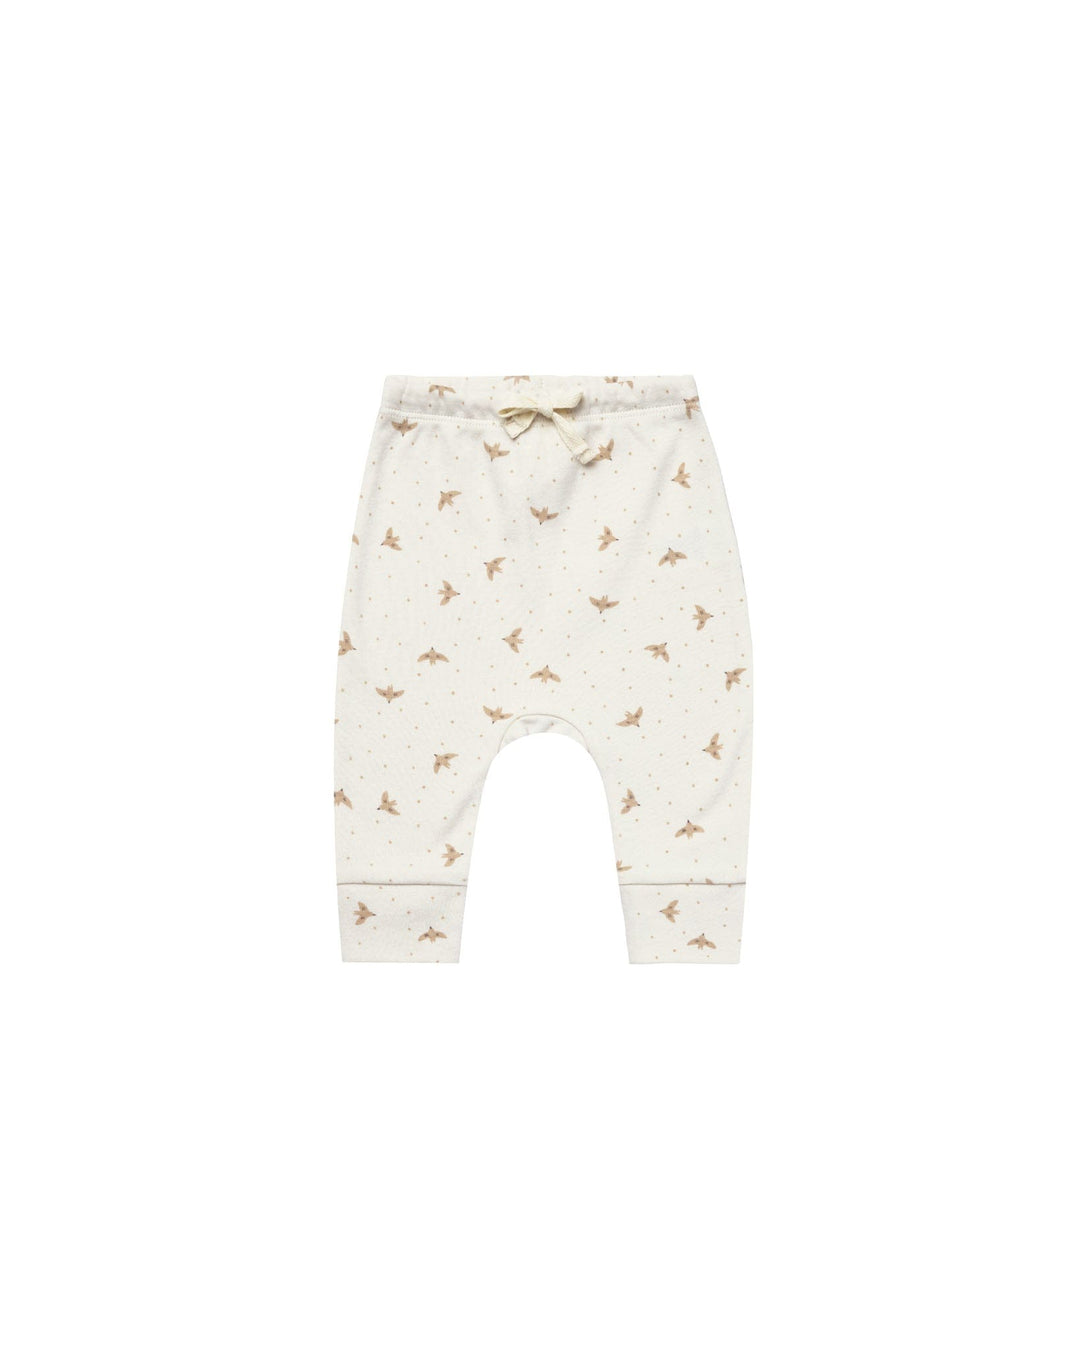 Quincy Mae Baby & Toddler Bottoms Drawstring Pant - Doves